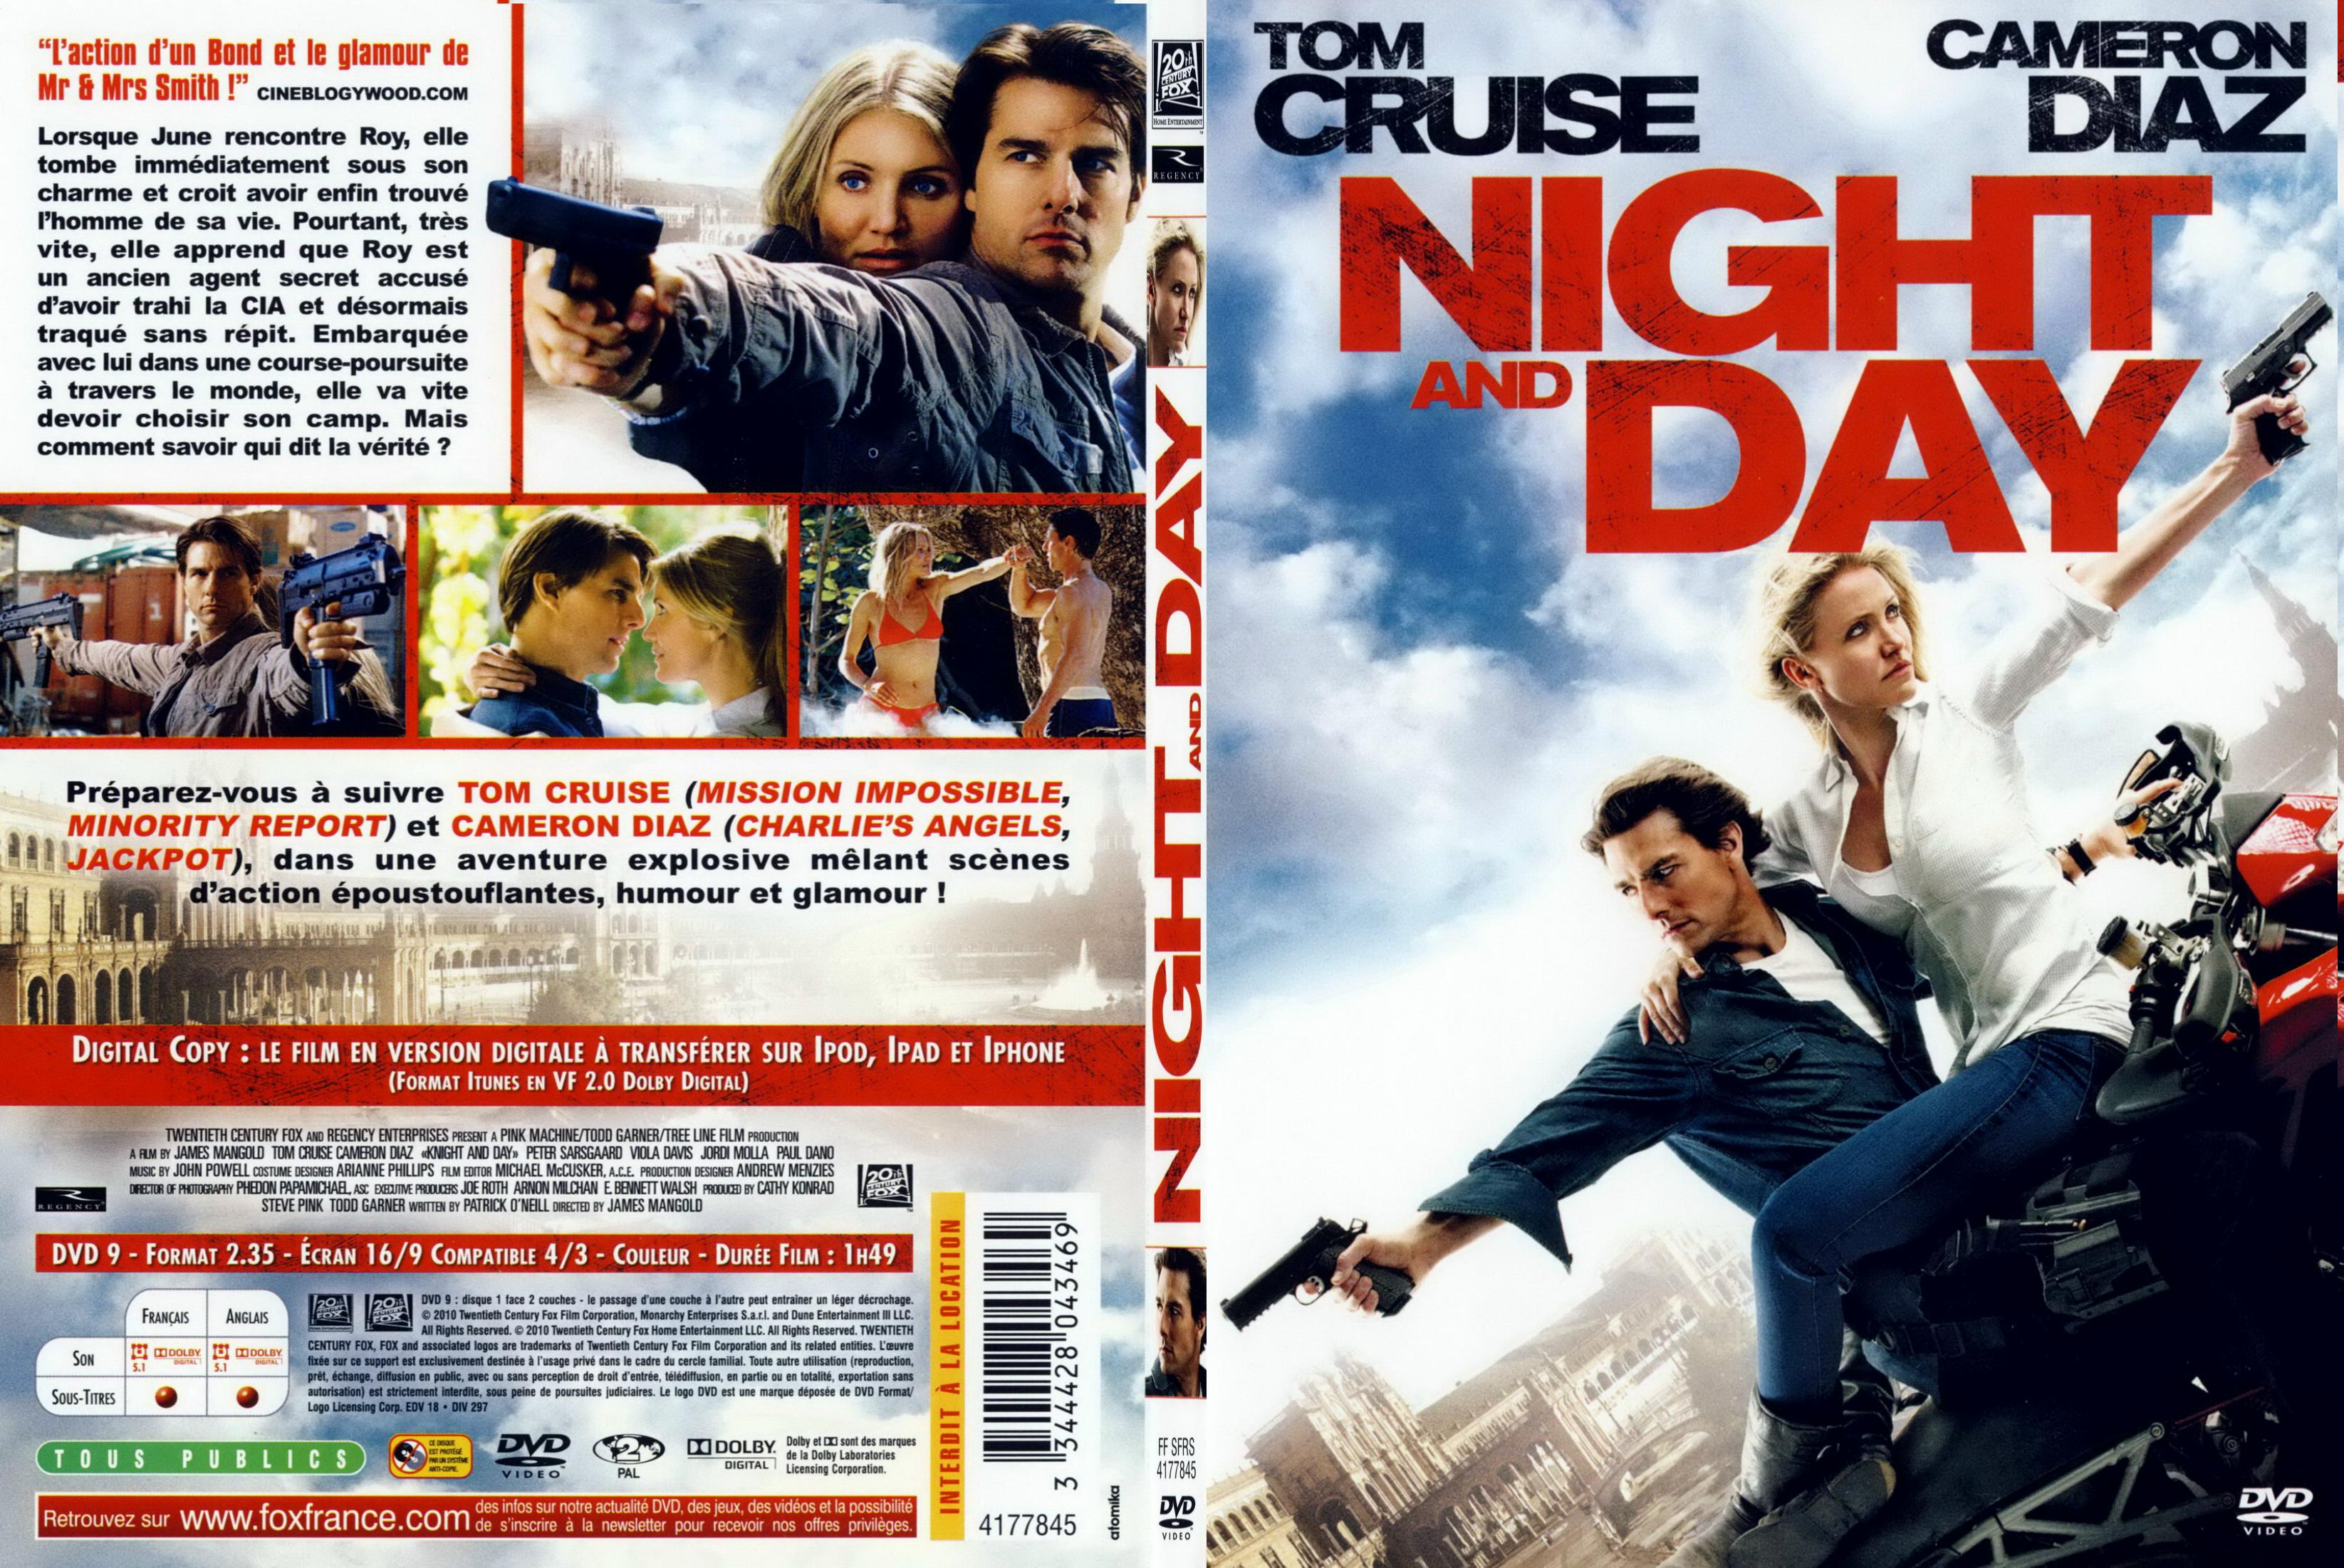 Jaquette DVD Night and day - SLIM